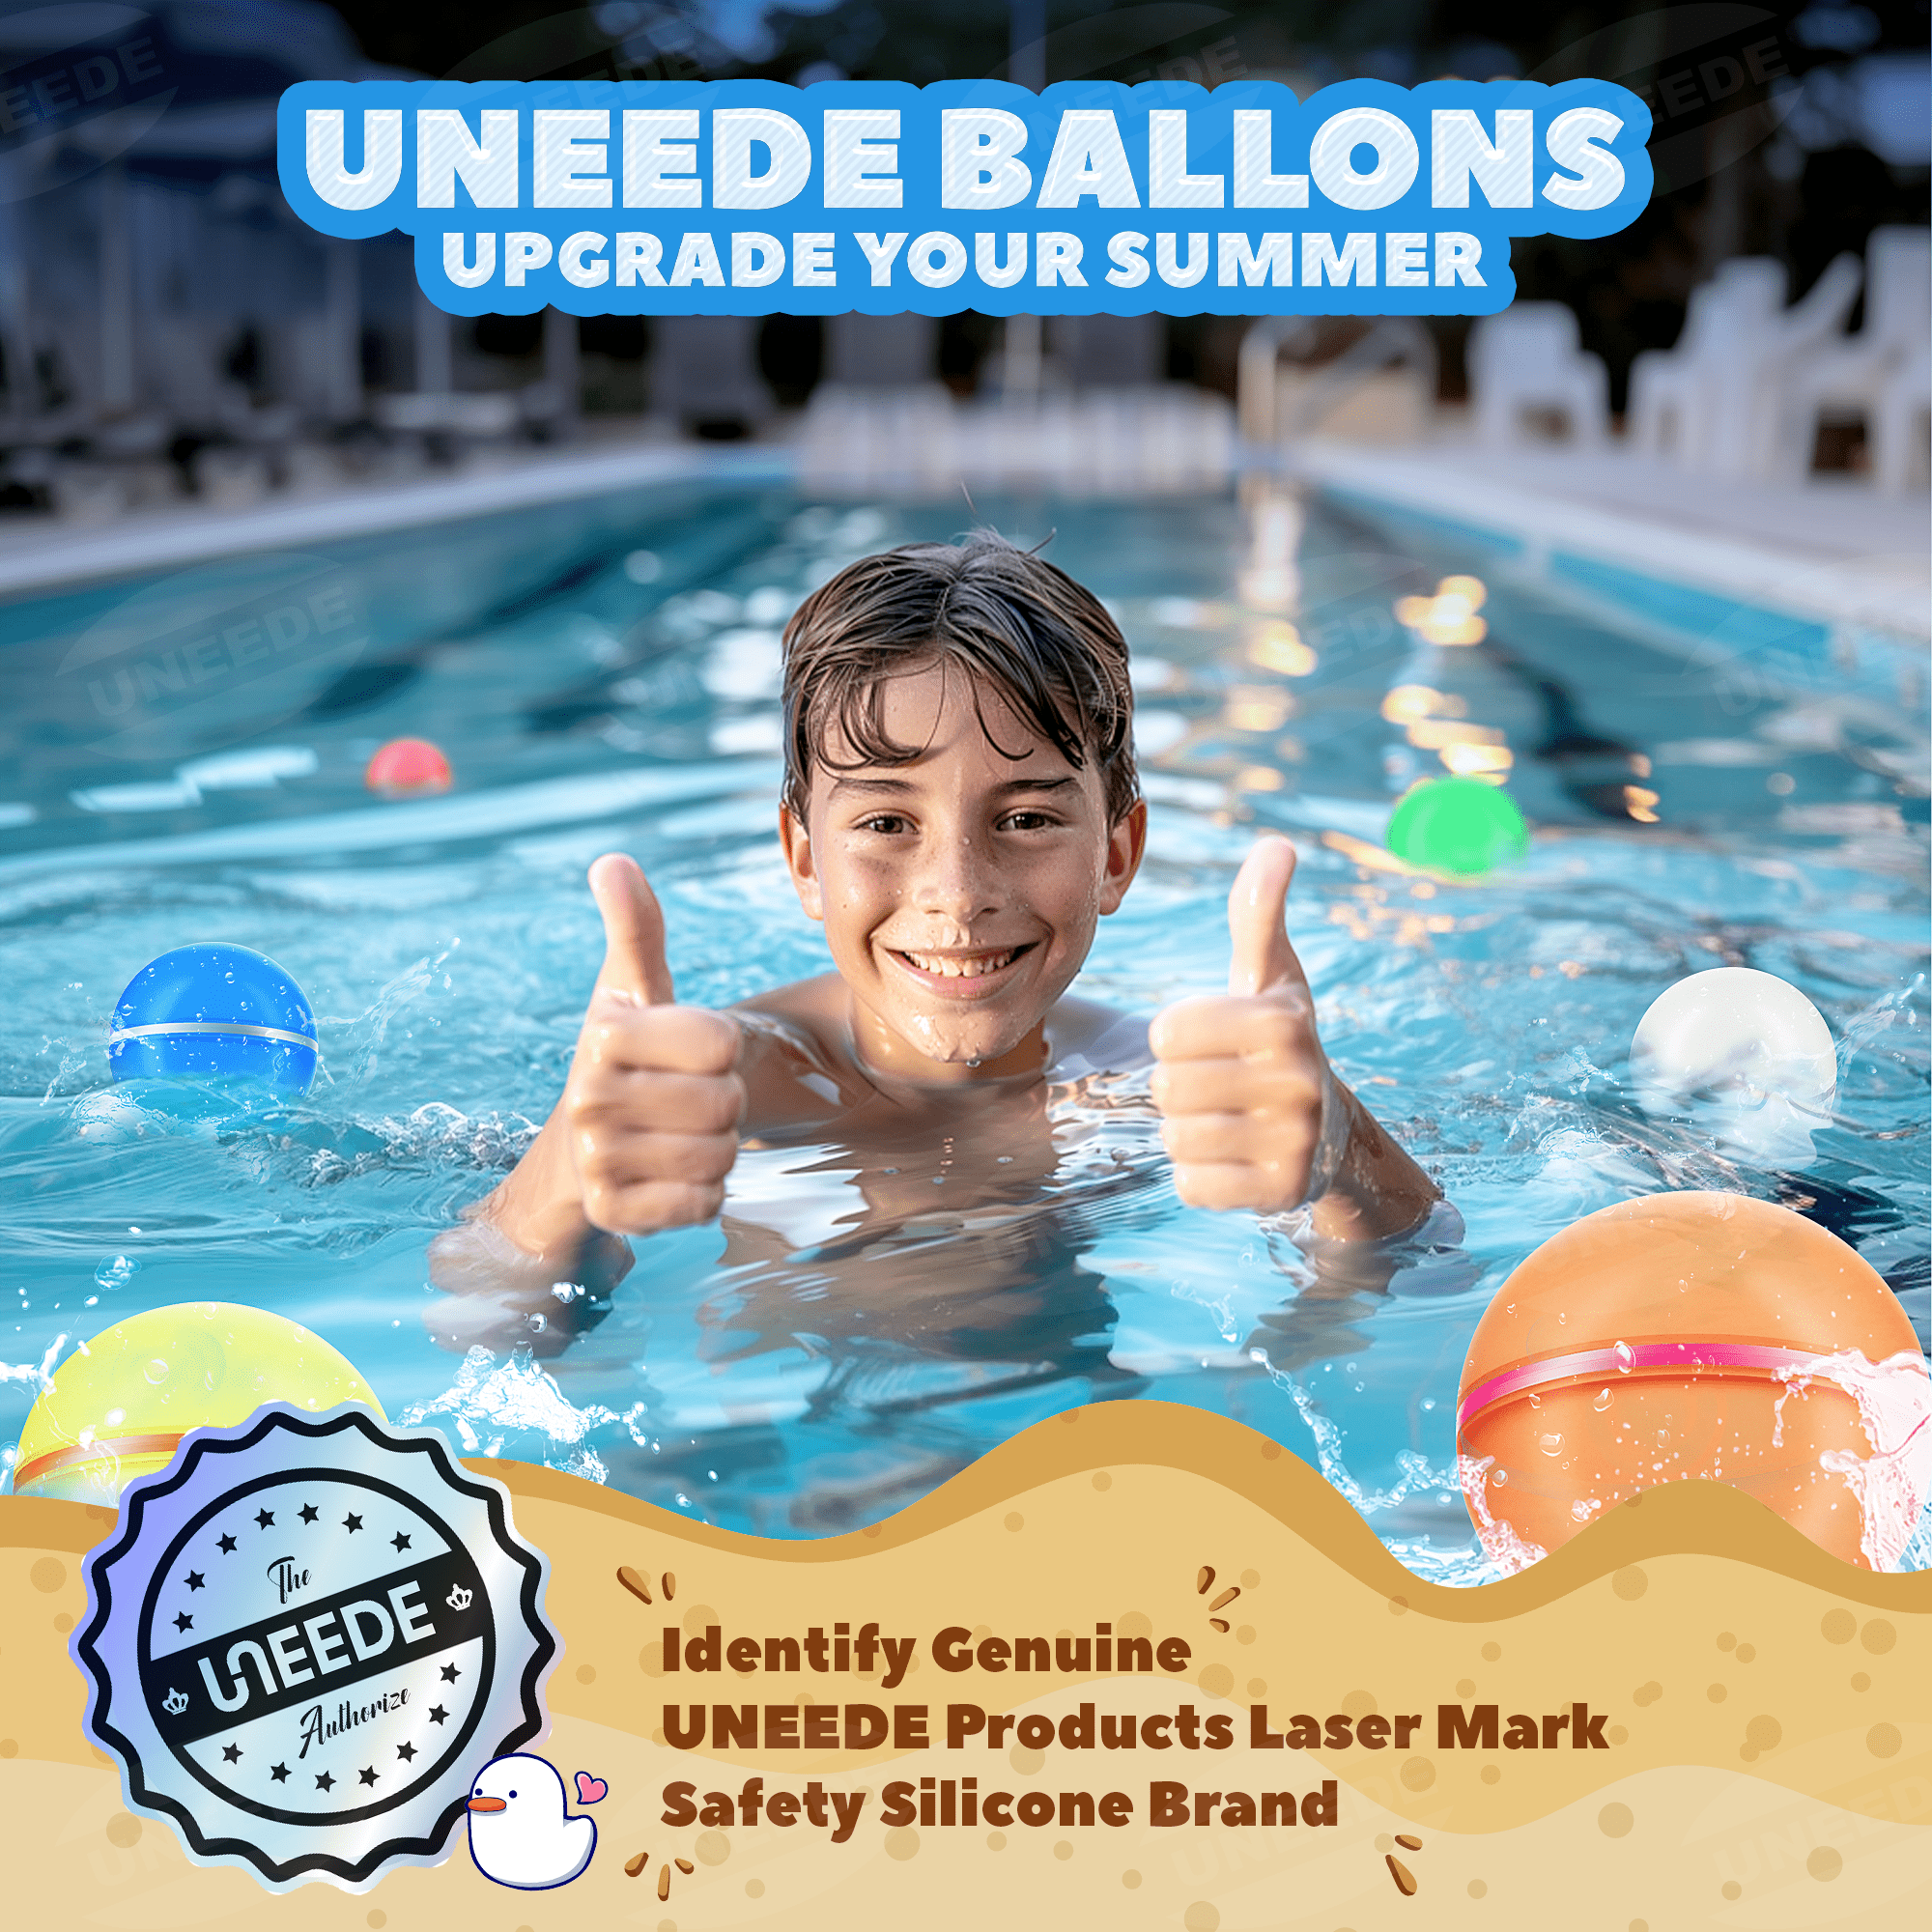 Discover the benefits of UNEEDE reusable water balloons: sustainable splashing fun